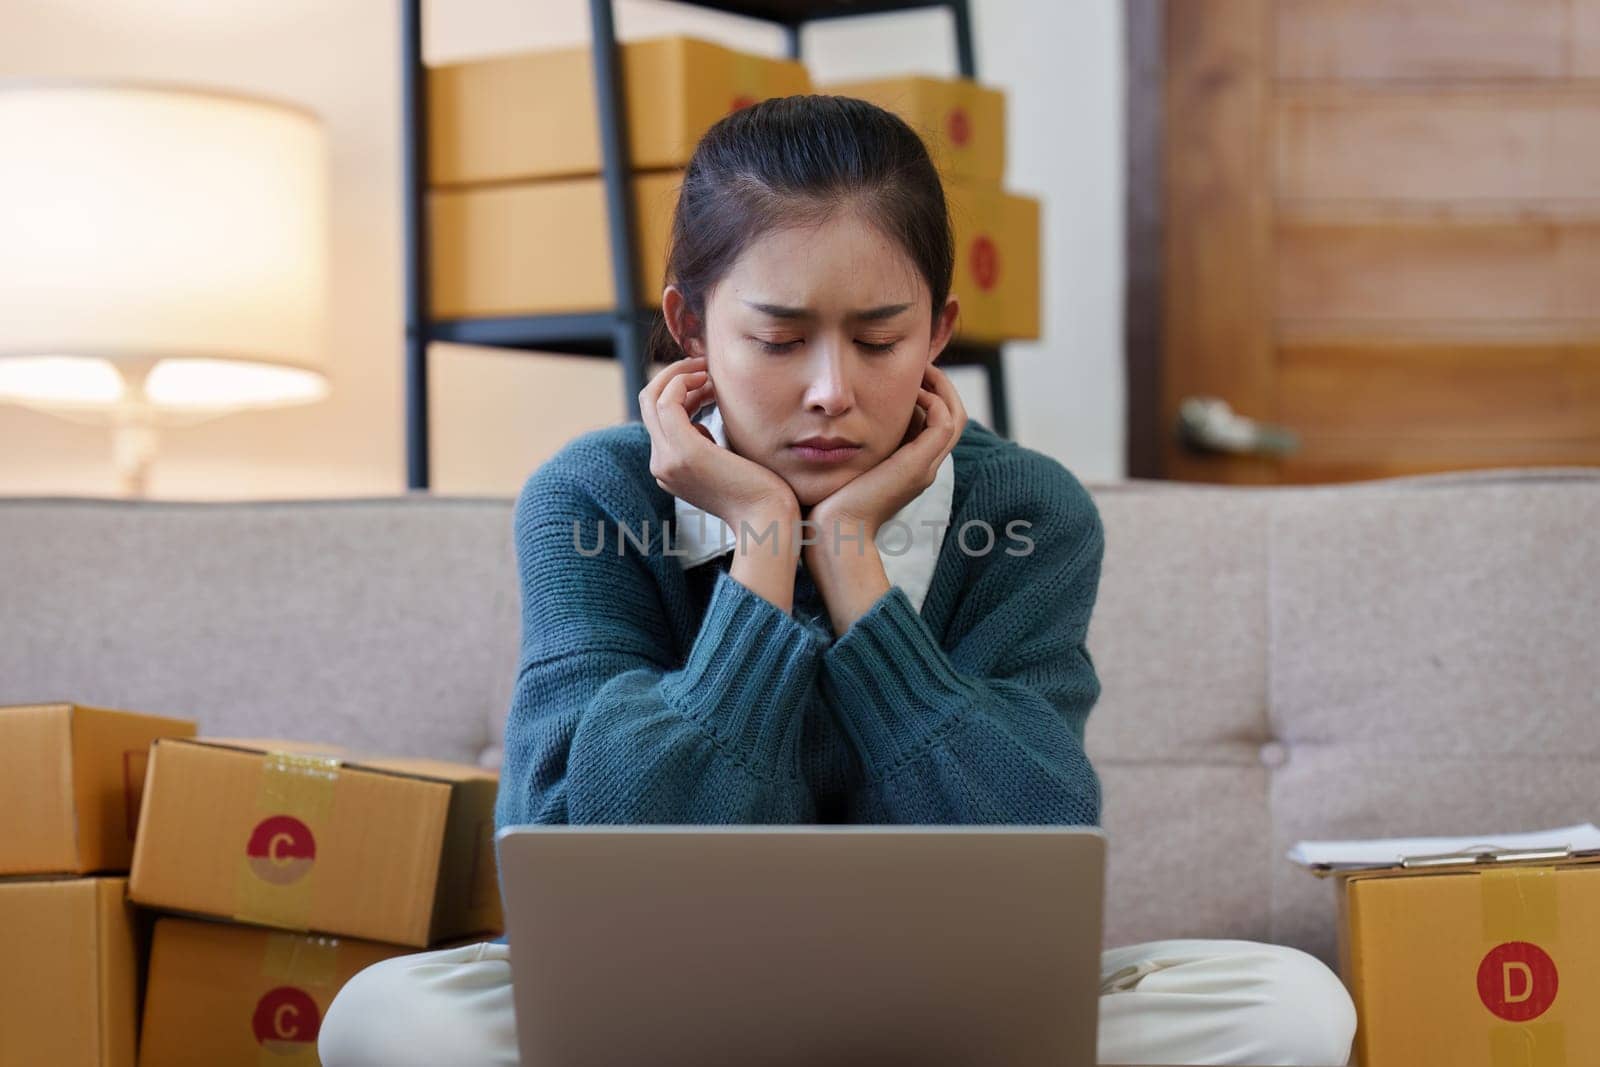 Small businesses SME owners female entrepreneurs stress while check online orders to prepare to pack the boxes, sell to customers, sme business ideas online.